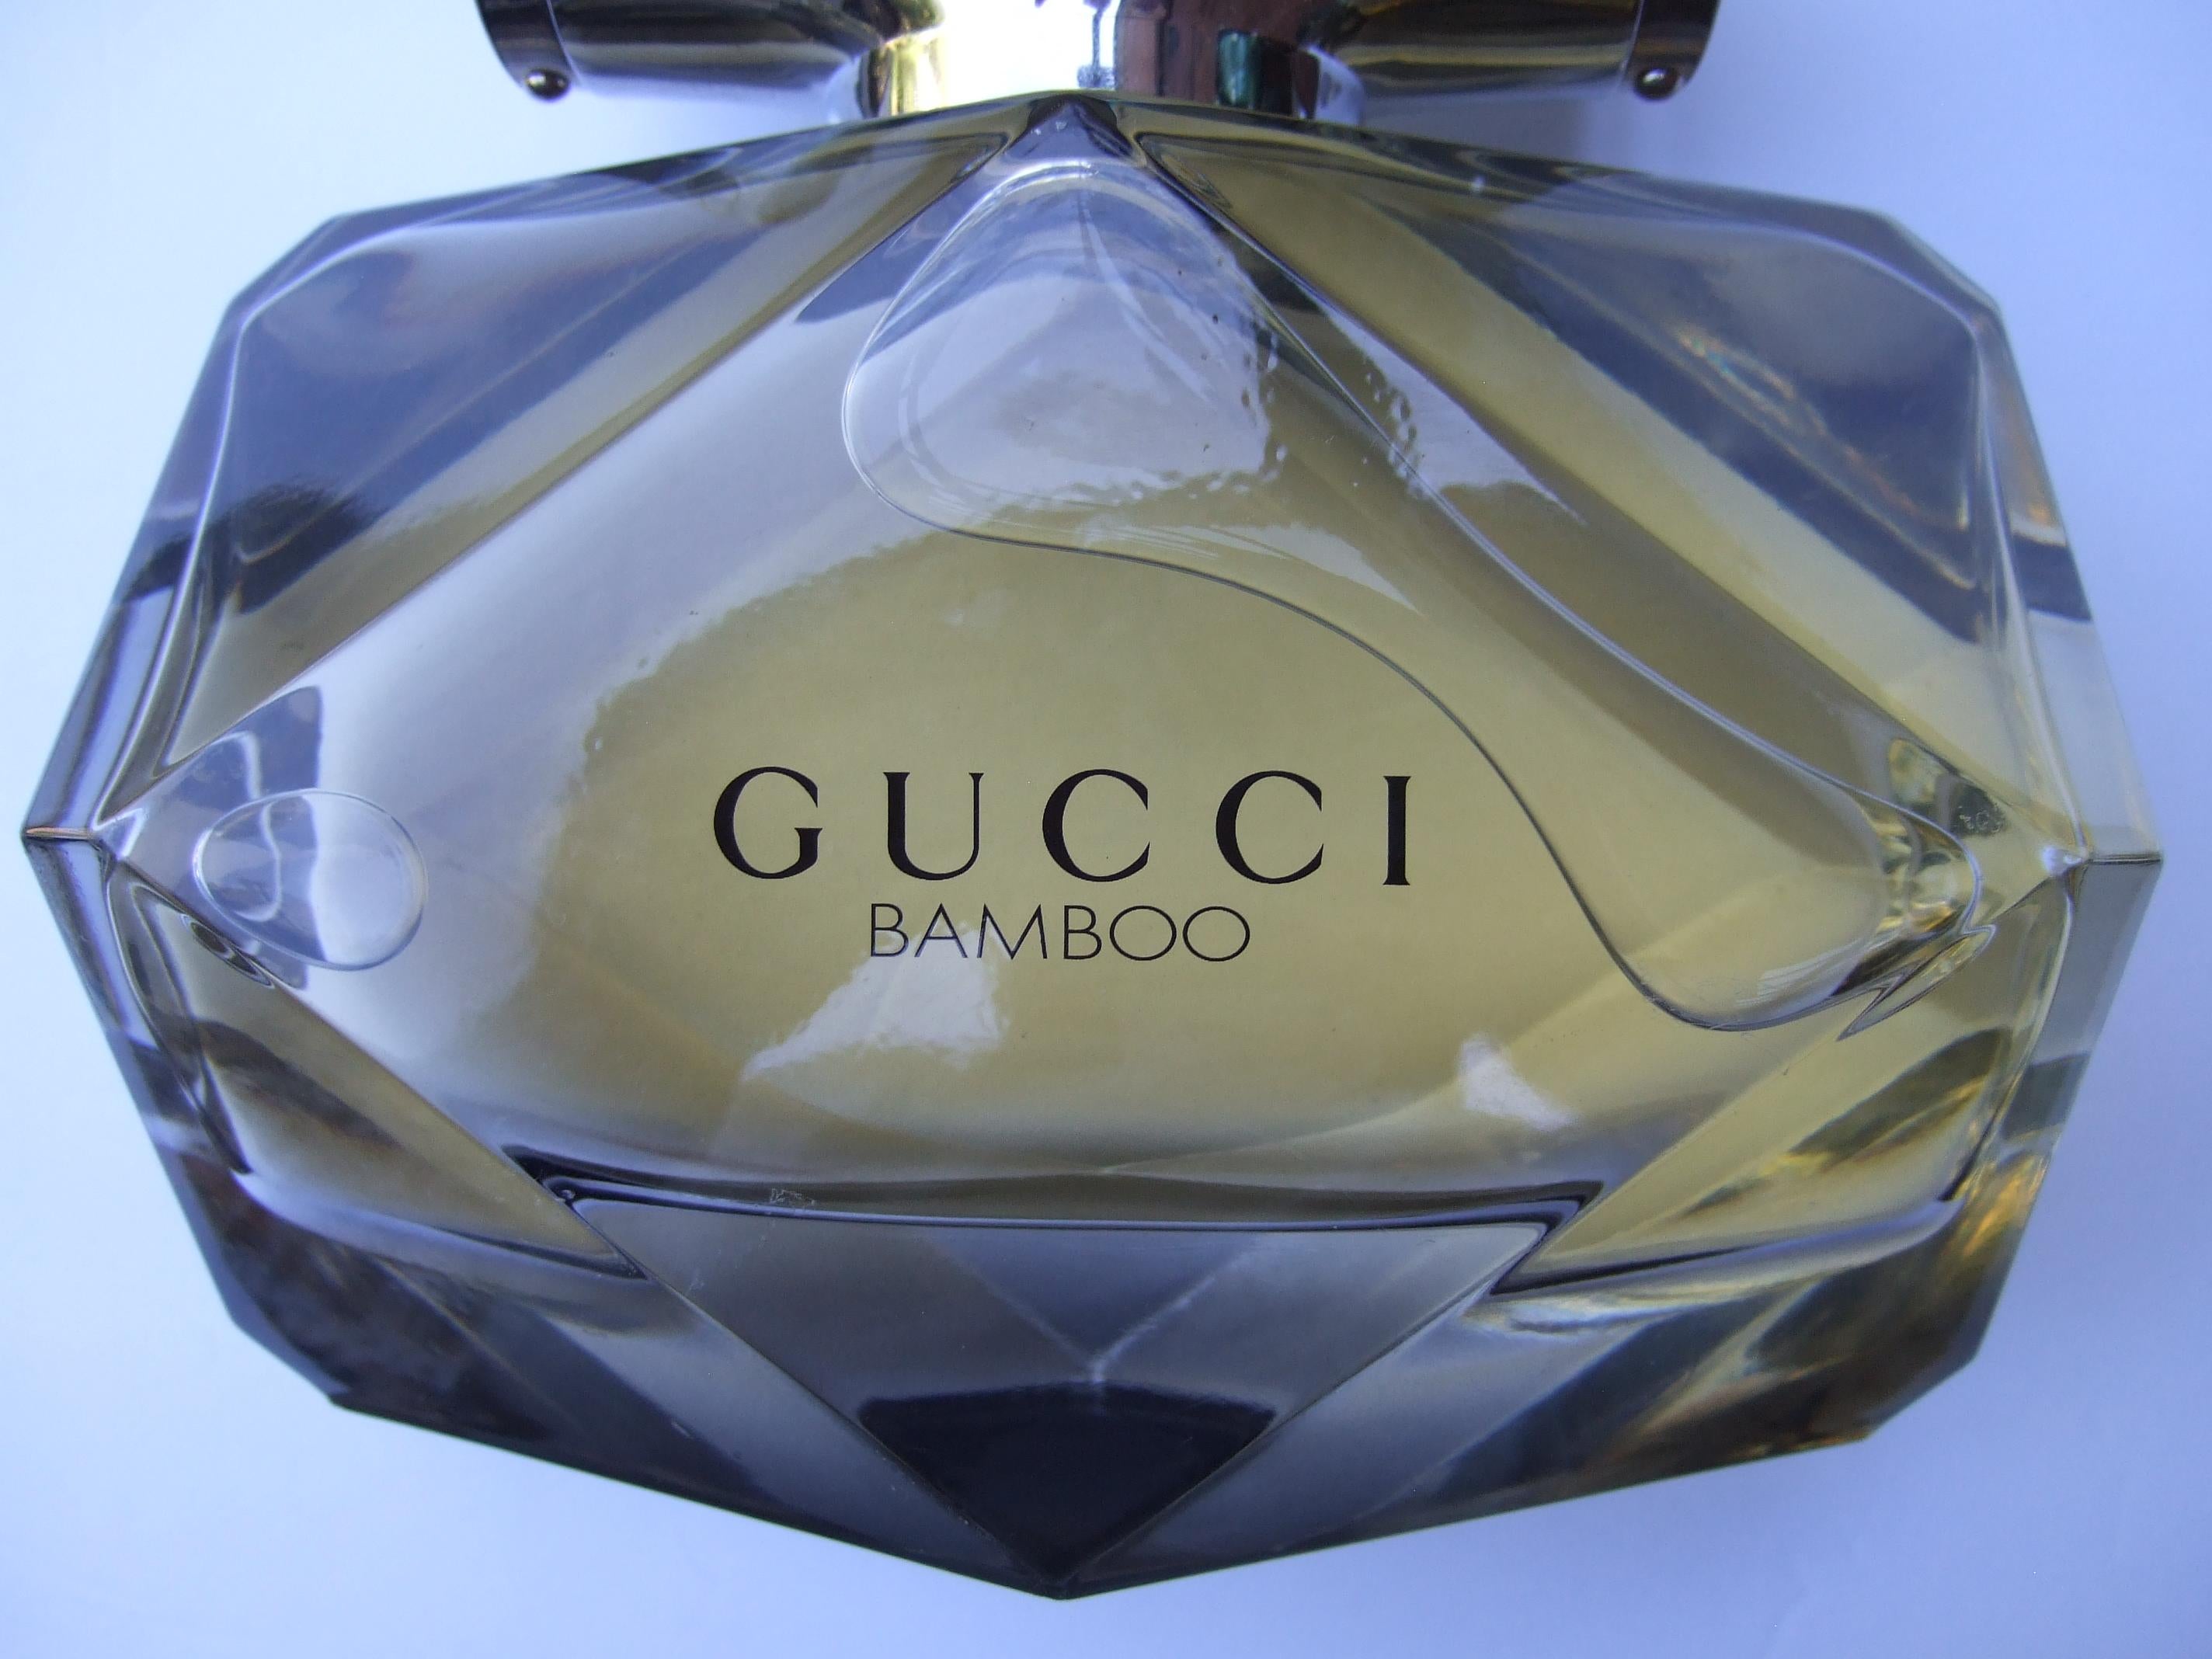 Gucci Bamboo Huge Glass Factice Faceted Display Dekorative Flasche c 21st c  im Angebot 1